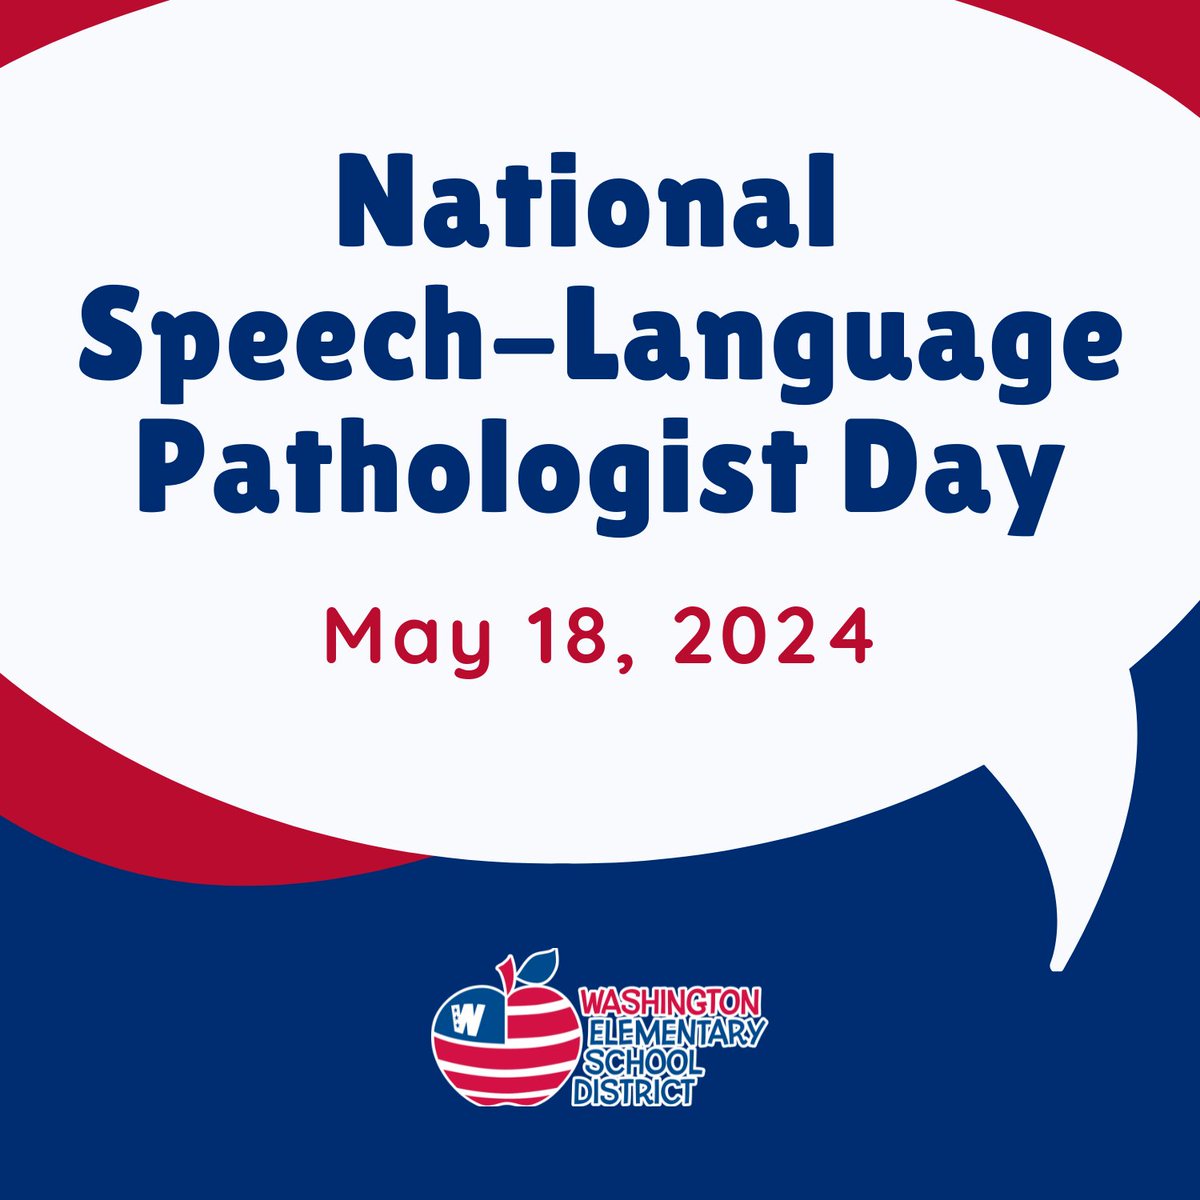 It's National Speech-Language Pathologist Day! A special thank you to all of our SLPs across the district who are dedicated to helping students with their speech and communication skills. We appreciate their hard work, support and expertise! #WESDFamily